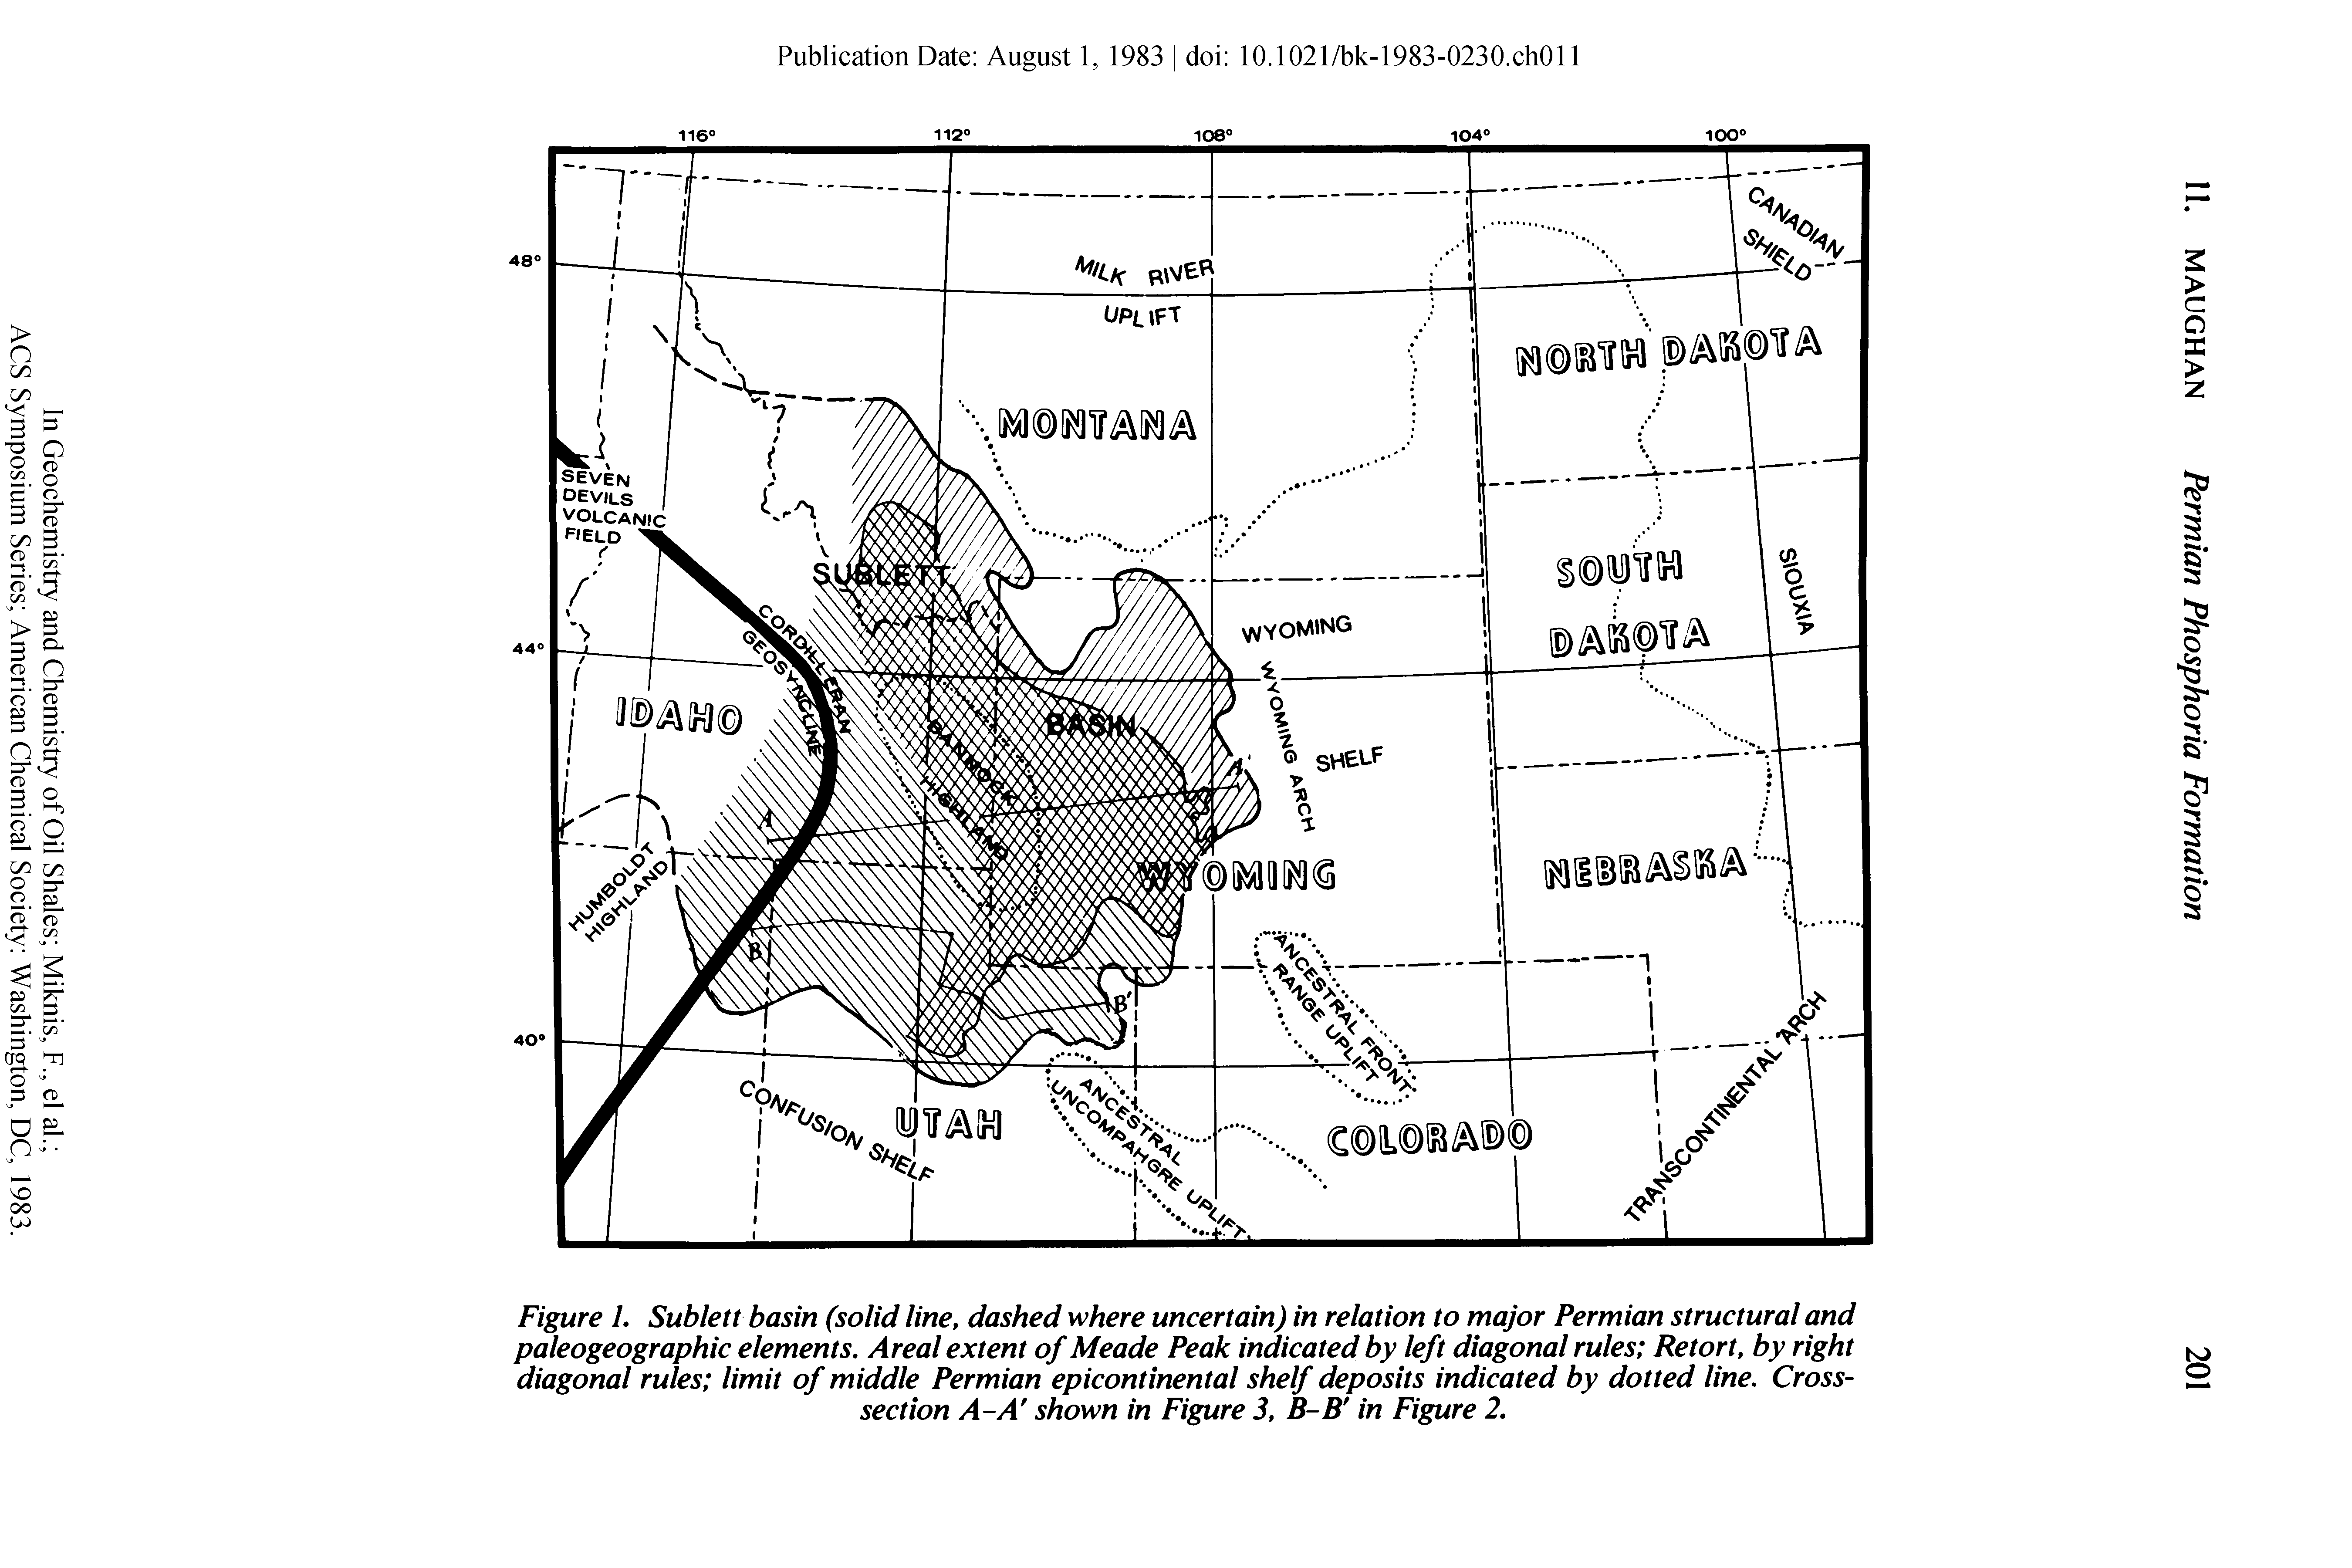 Figure 1. Sublett basin (solid line, dashed where uncertain) in relation to major Permian structural and paleogeographic elements. Areal extent of Meade Peak indicated by left diagonal rules Retort, by right diagonal rules limit of middle Permian epicontinental shelf deposits indicated by dotted line. Cross-section A-A shown in Figure 3, B-B in Figure 2.